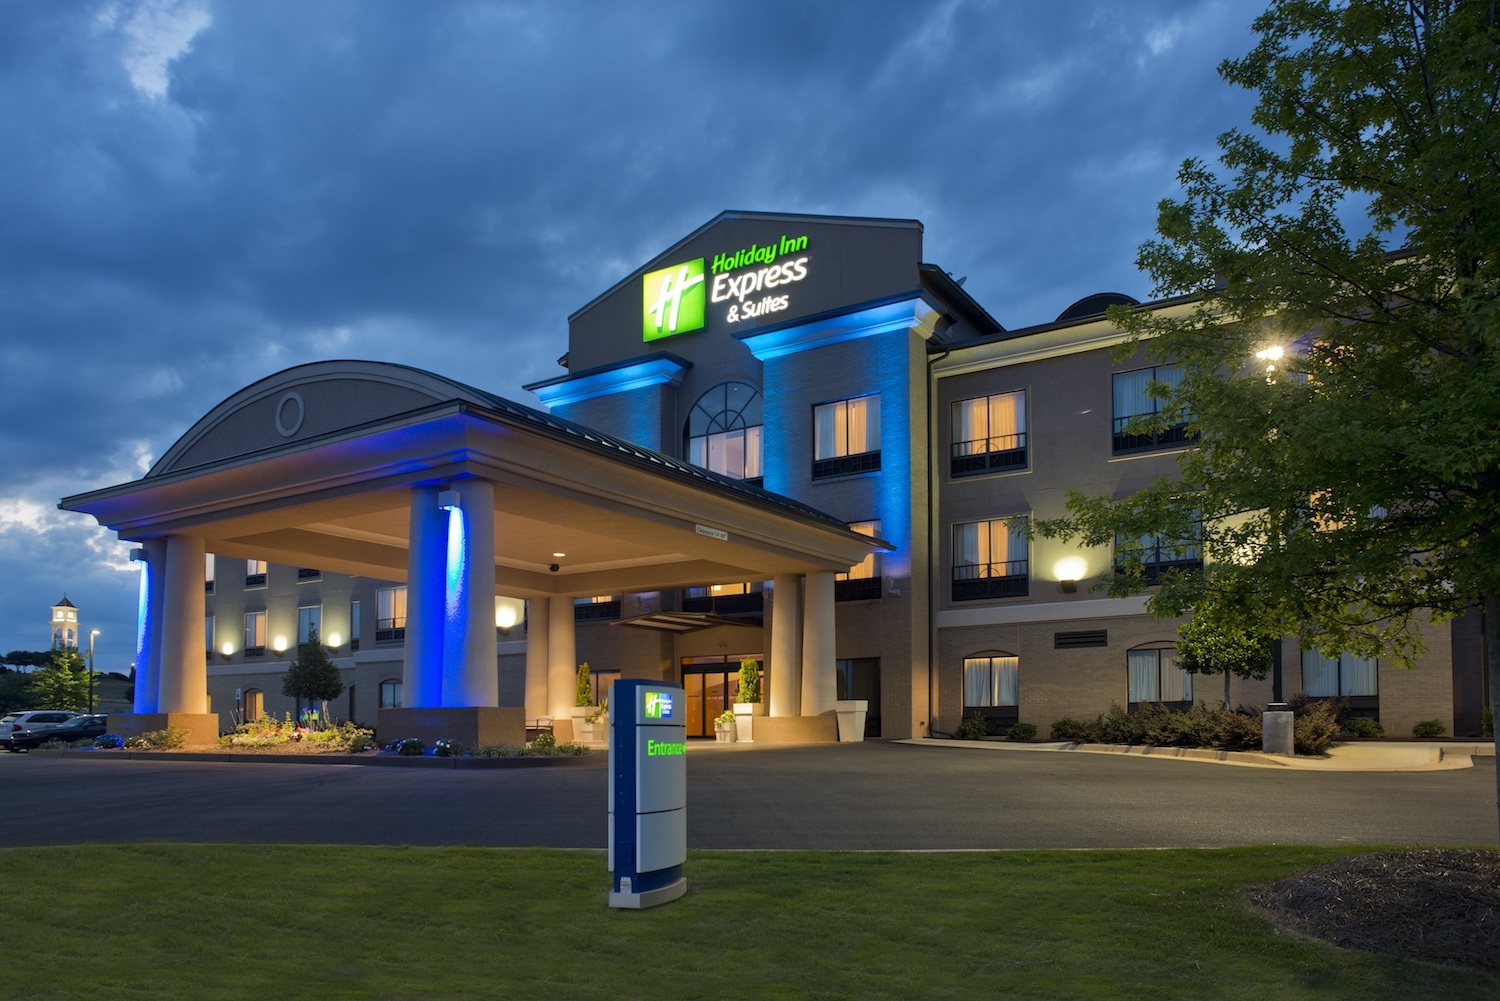 Photo of Holiday Inn Express Hotel & Suites Prattville South, Prattville, AL